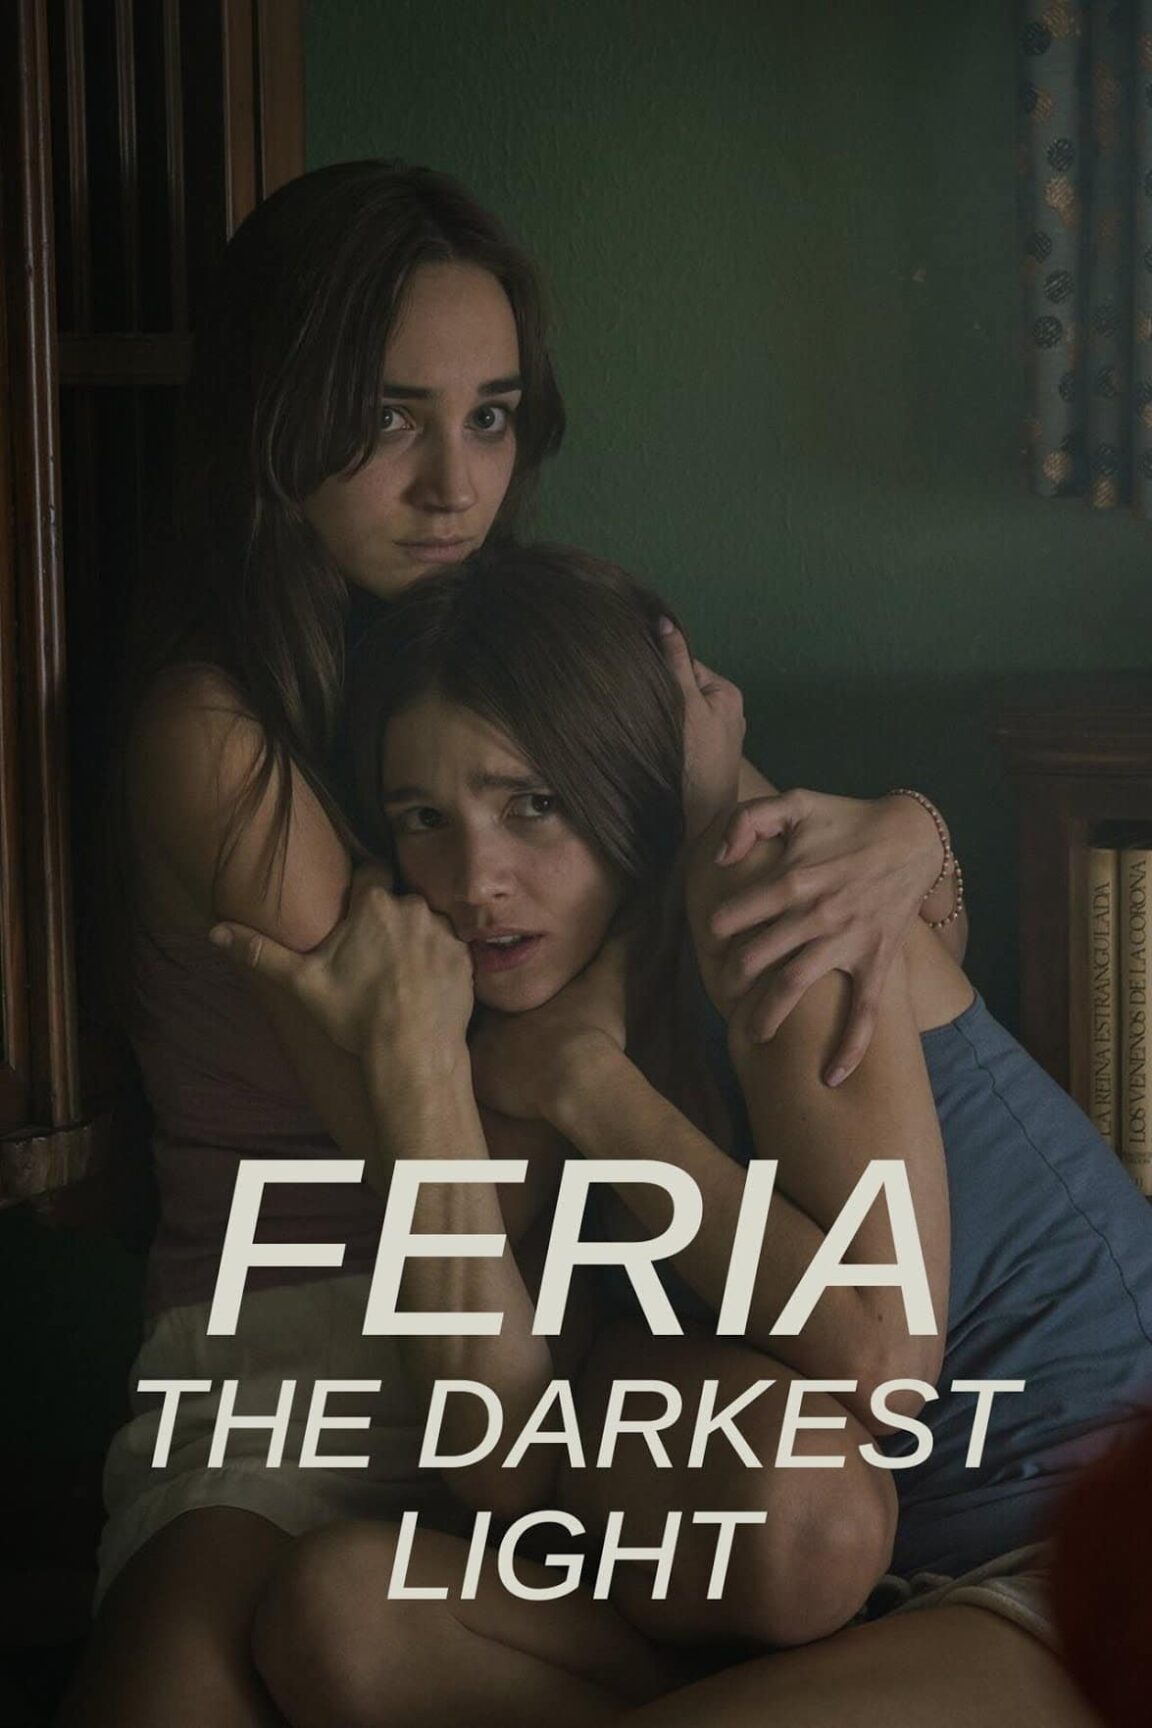 Feria The Darkest Light Cast Summary Synopsis Ost Review 0941